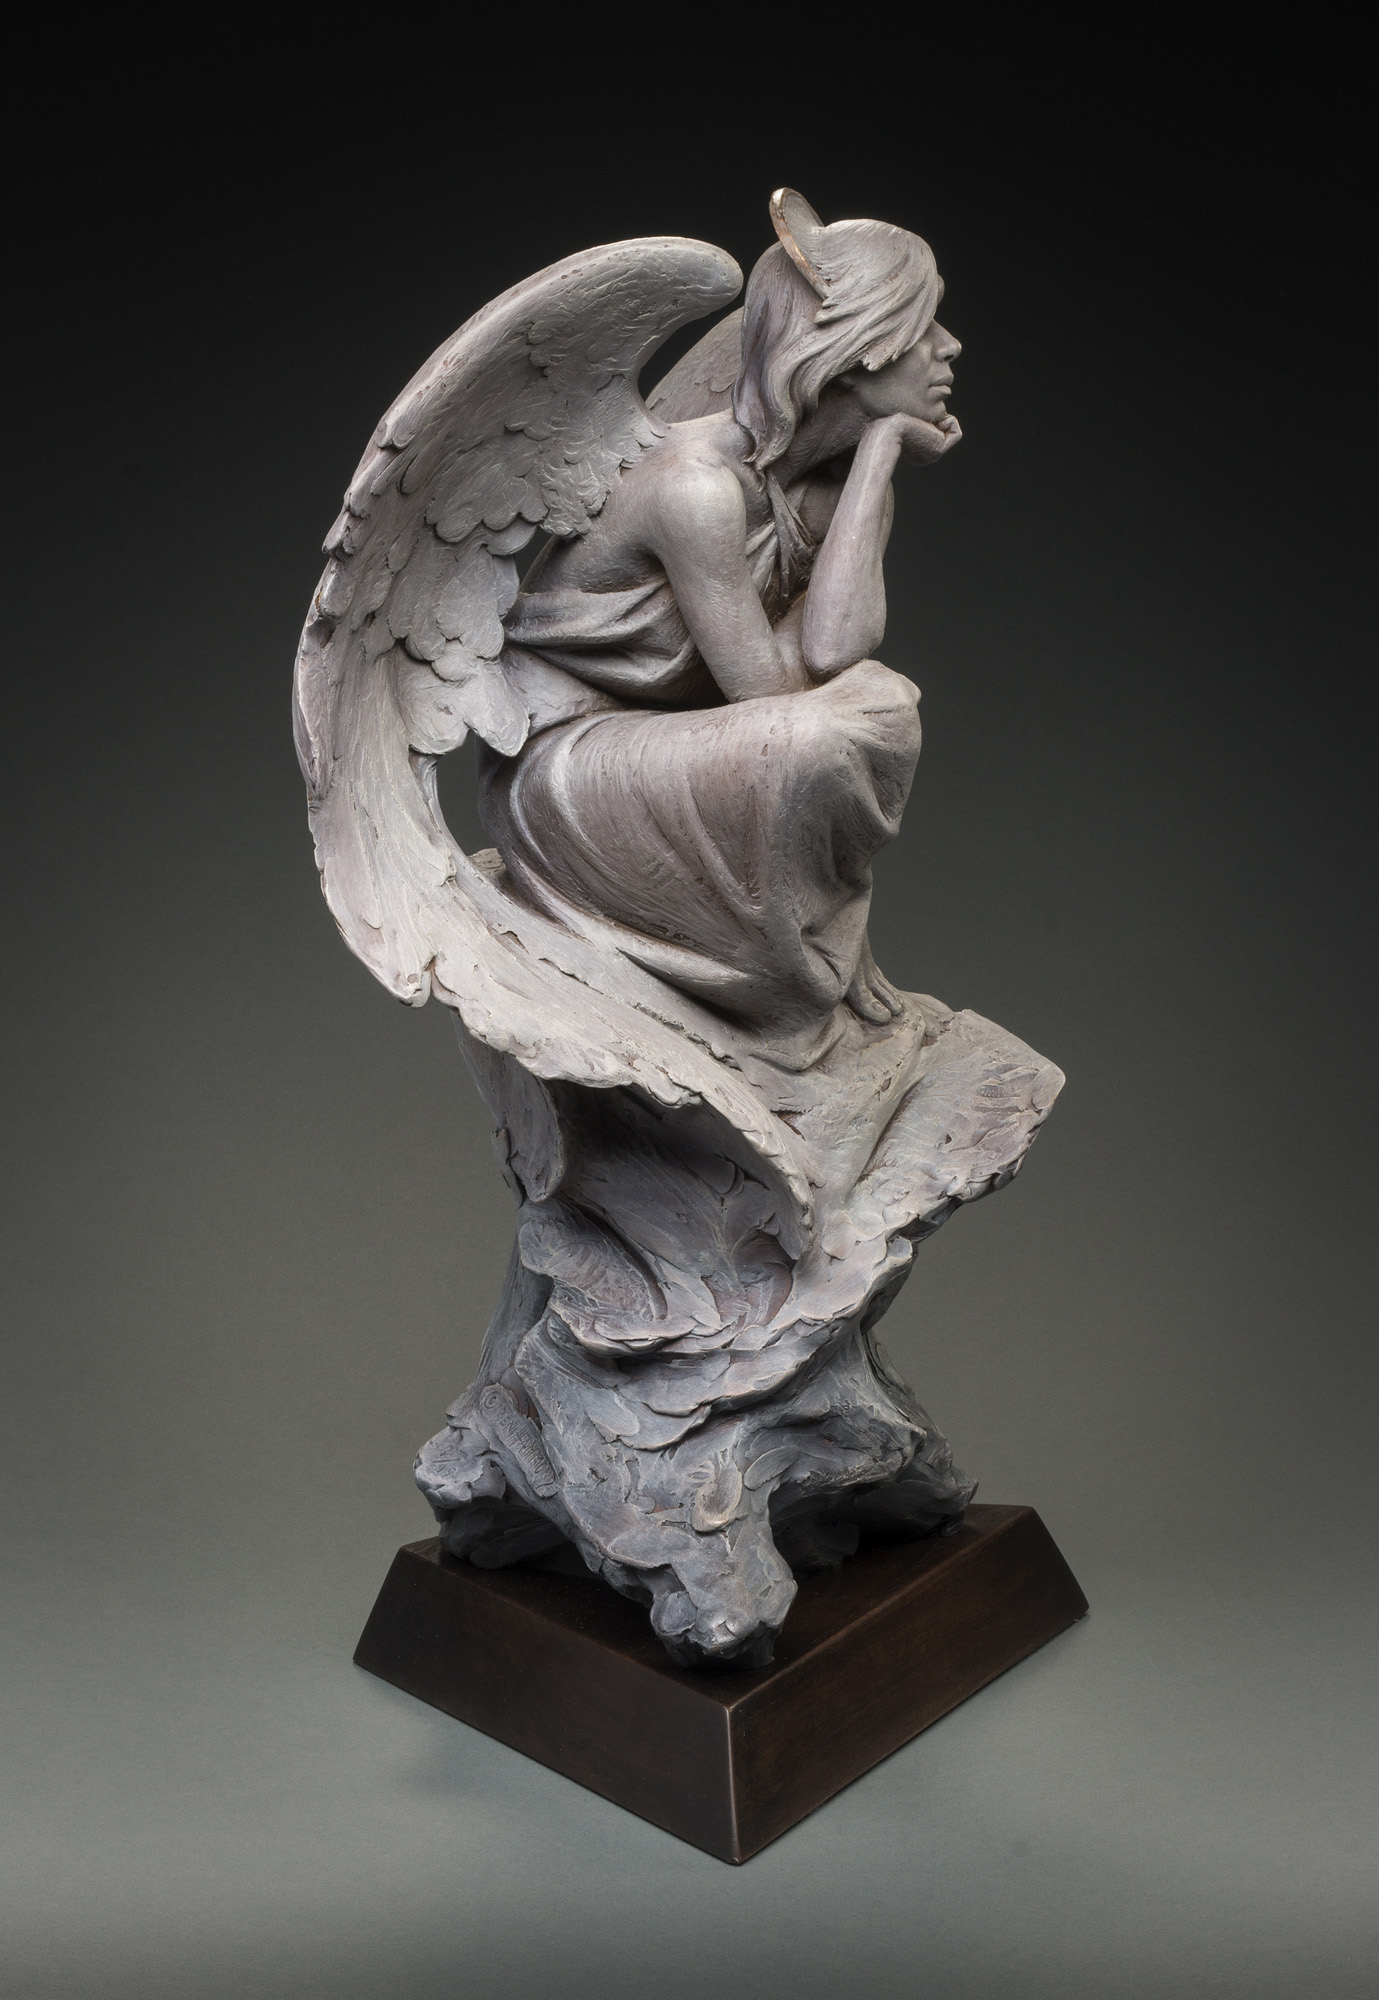 An Angel in Contemplation – SIDE VIEW